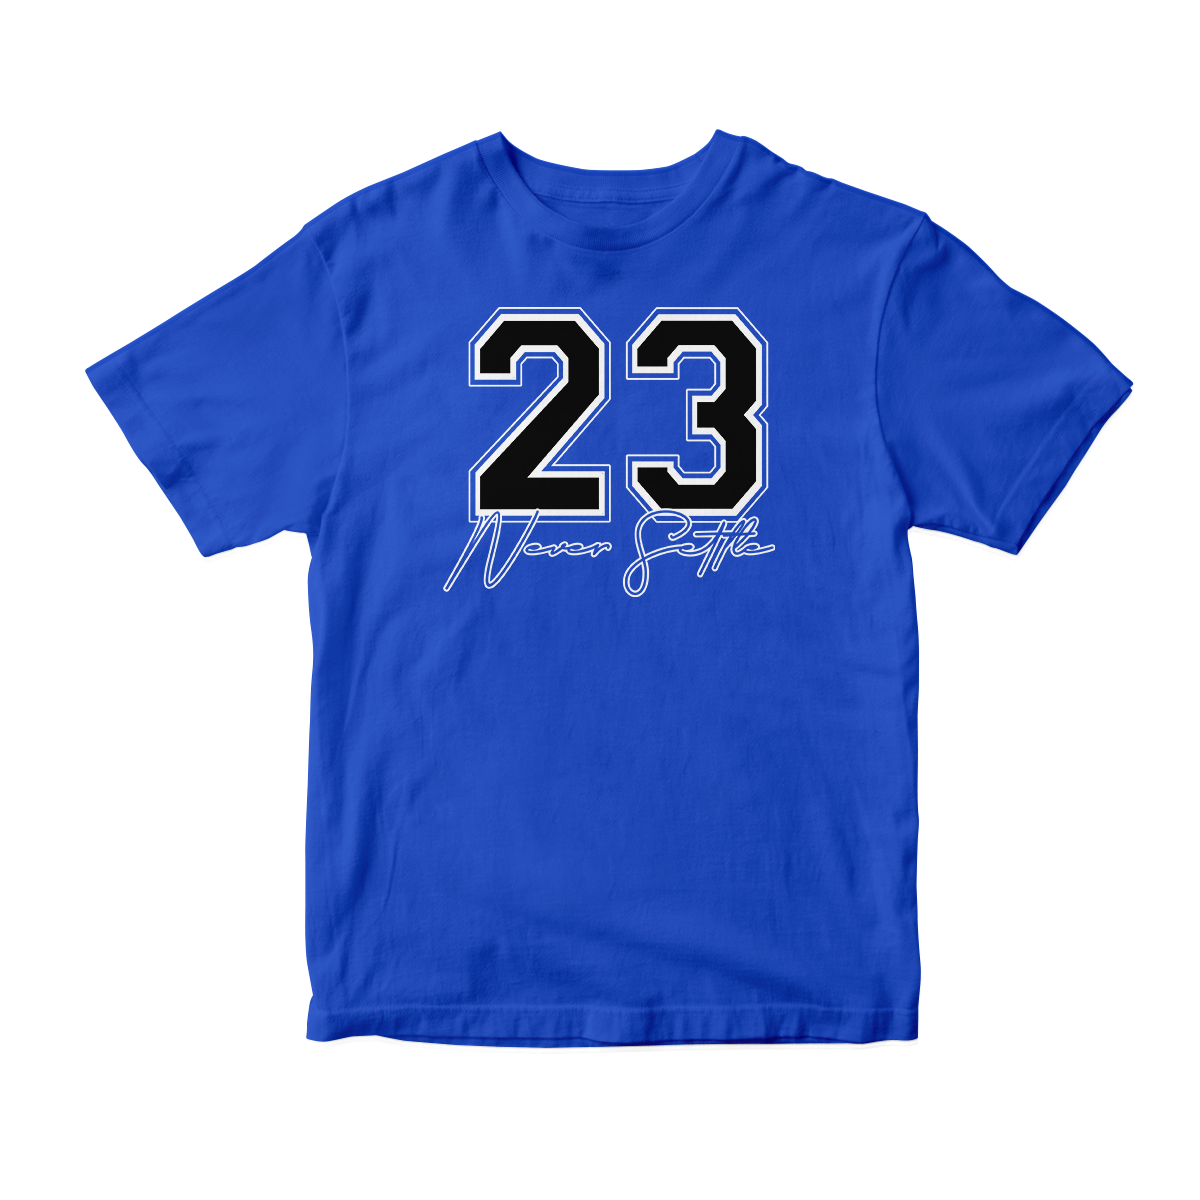 'Never Settle' in Game Royal CW Unisex Short Sleeve Tee